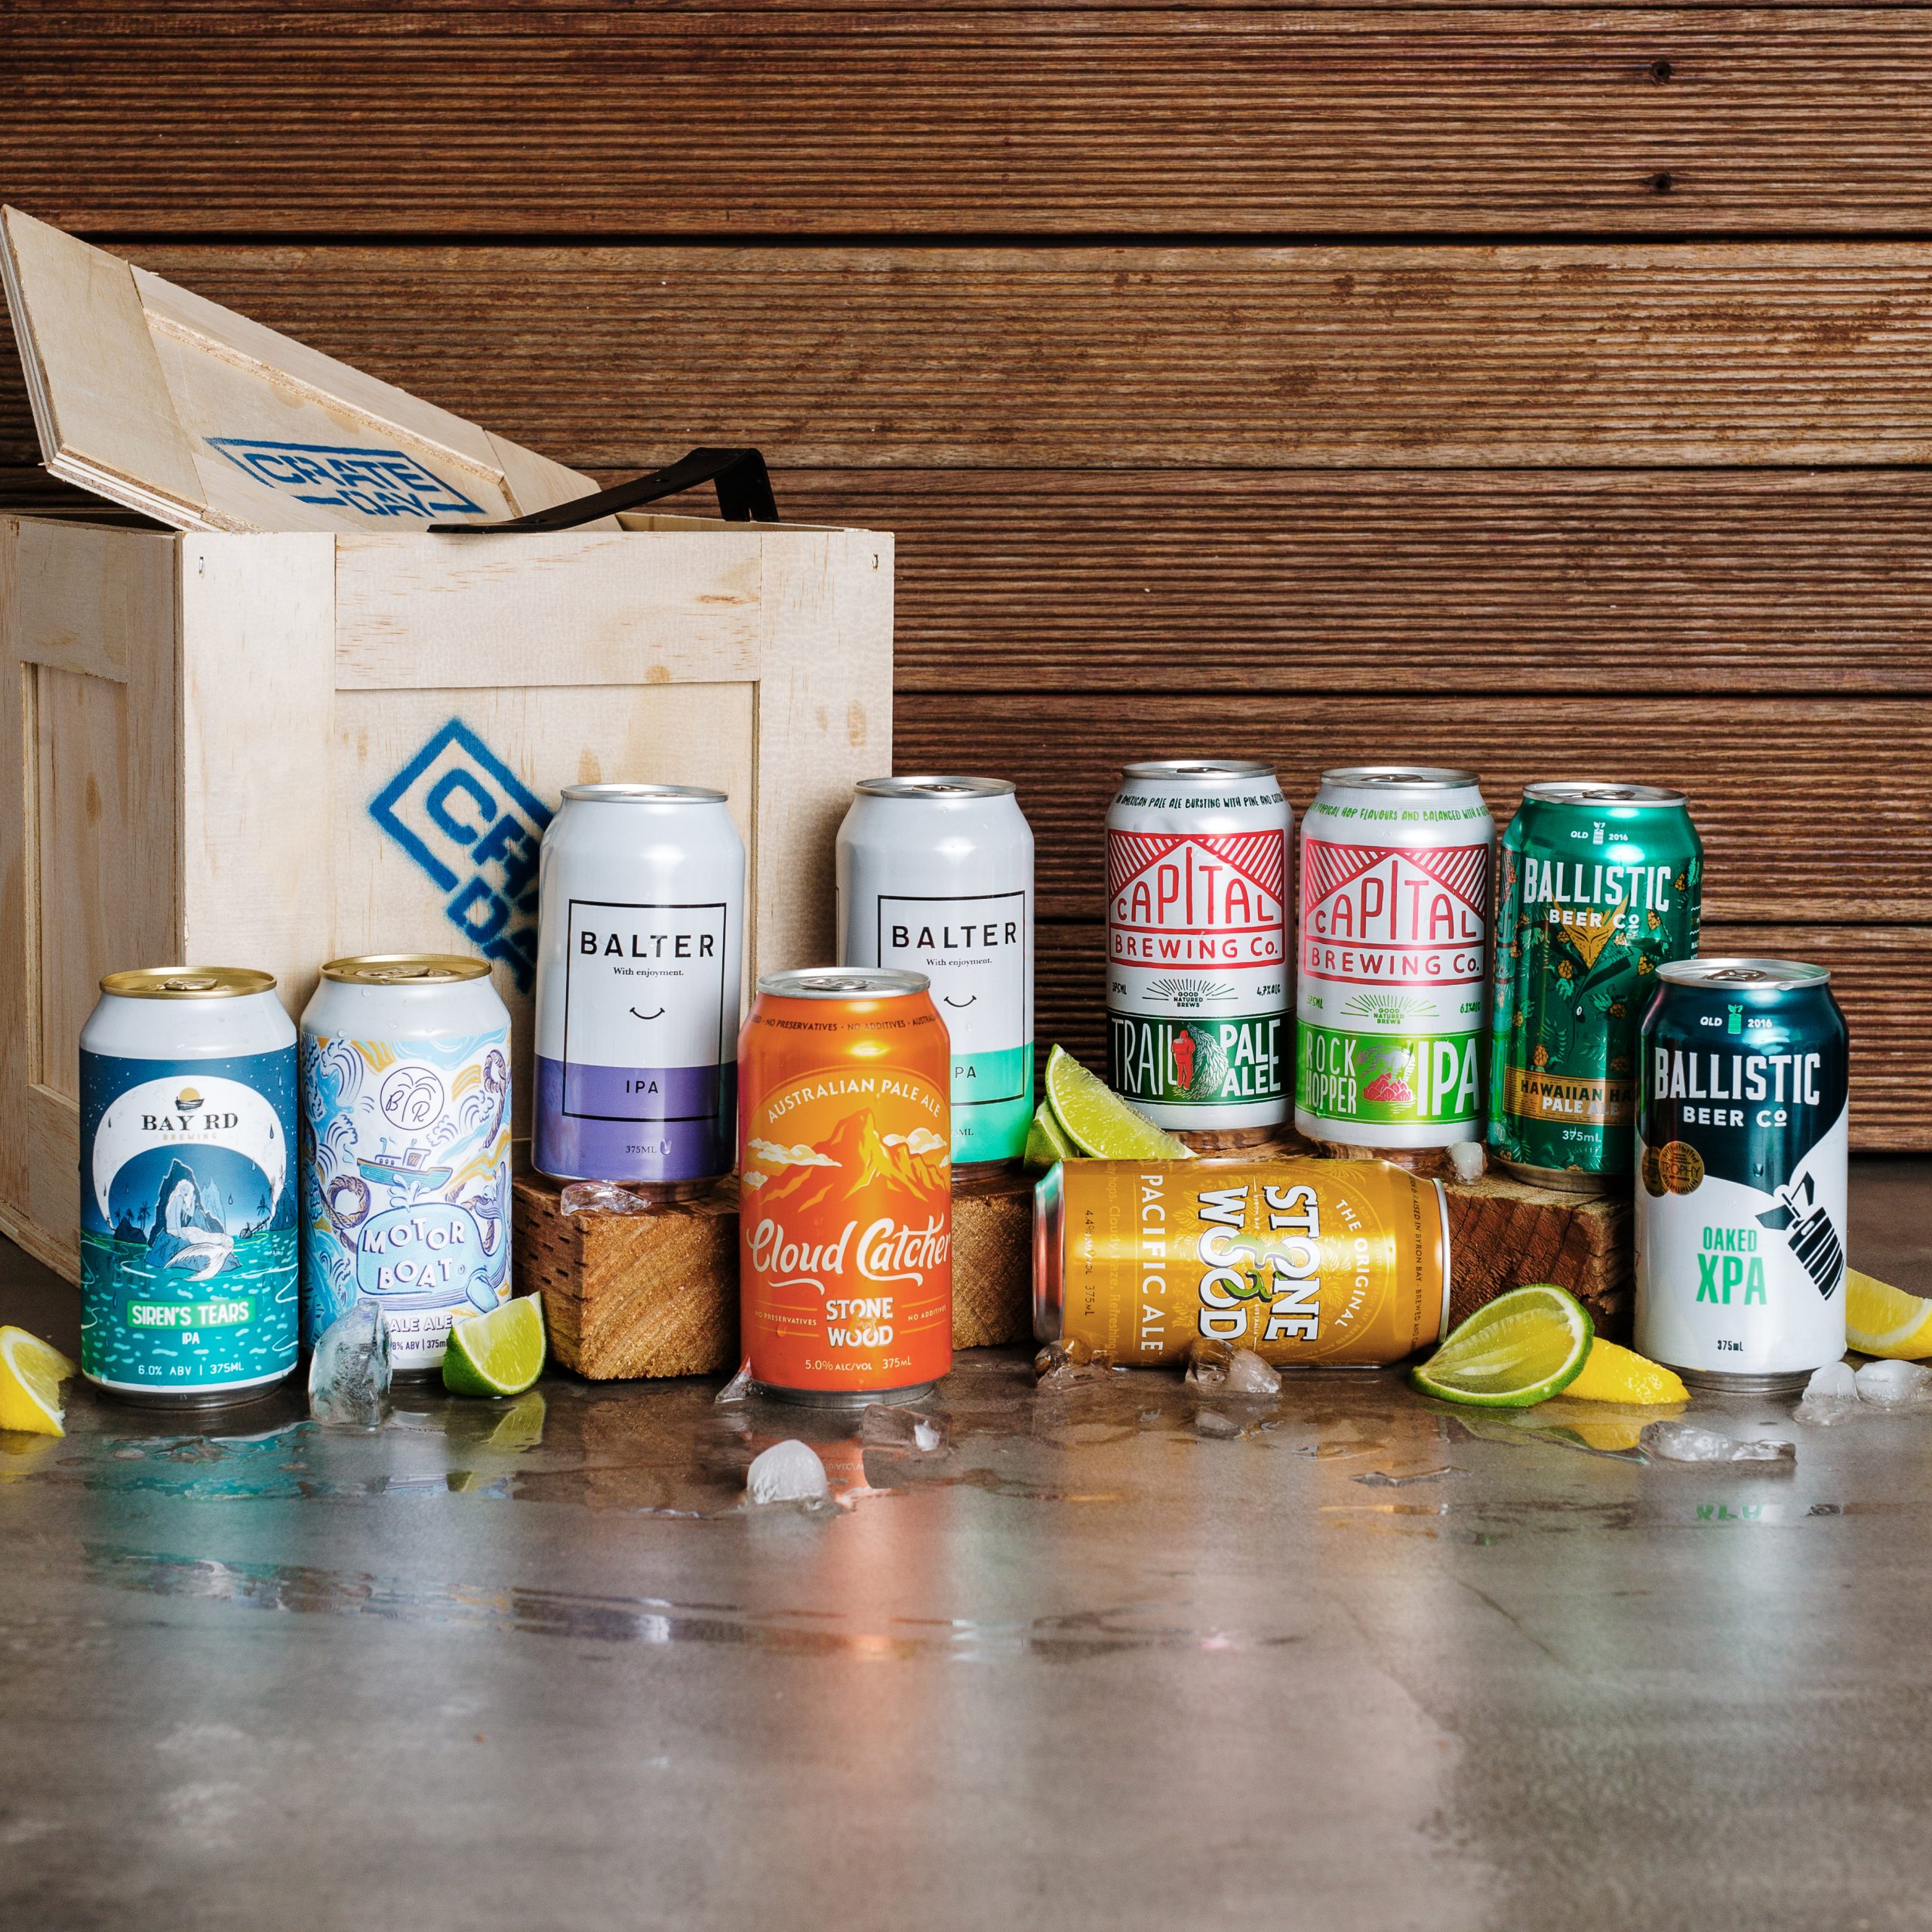 10 craft beers with wooden crate a pry bar.